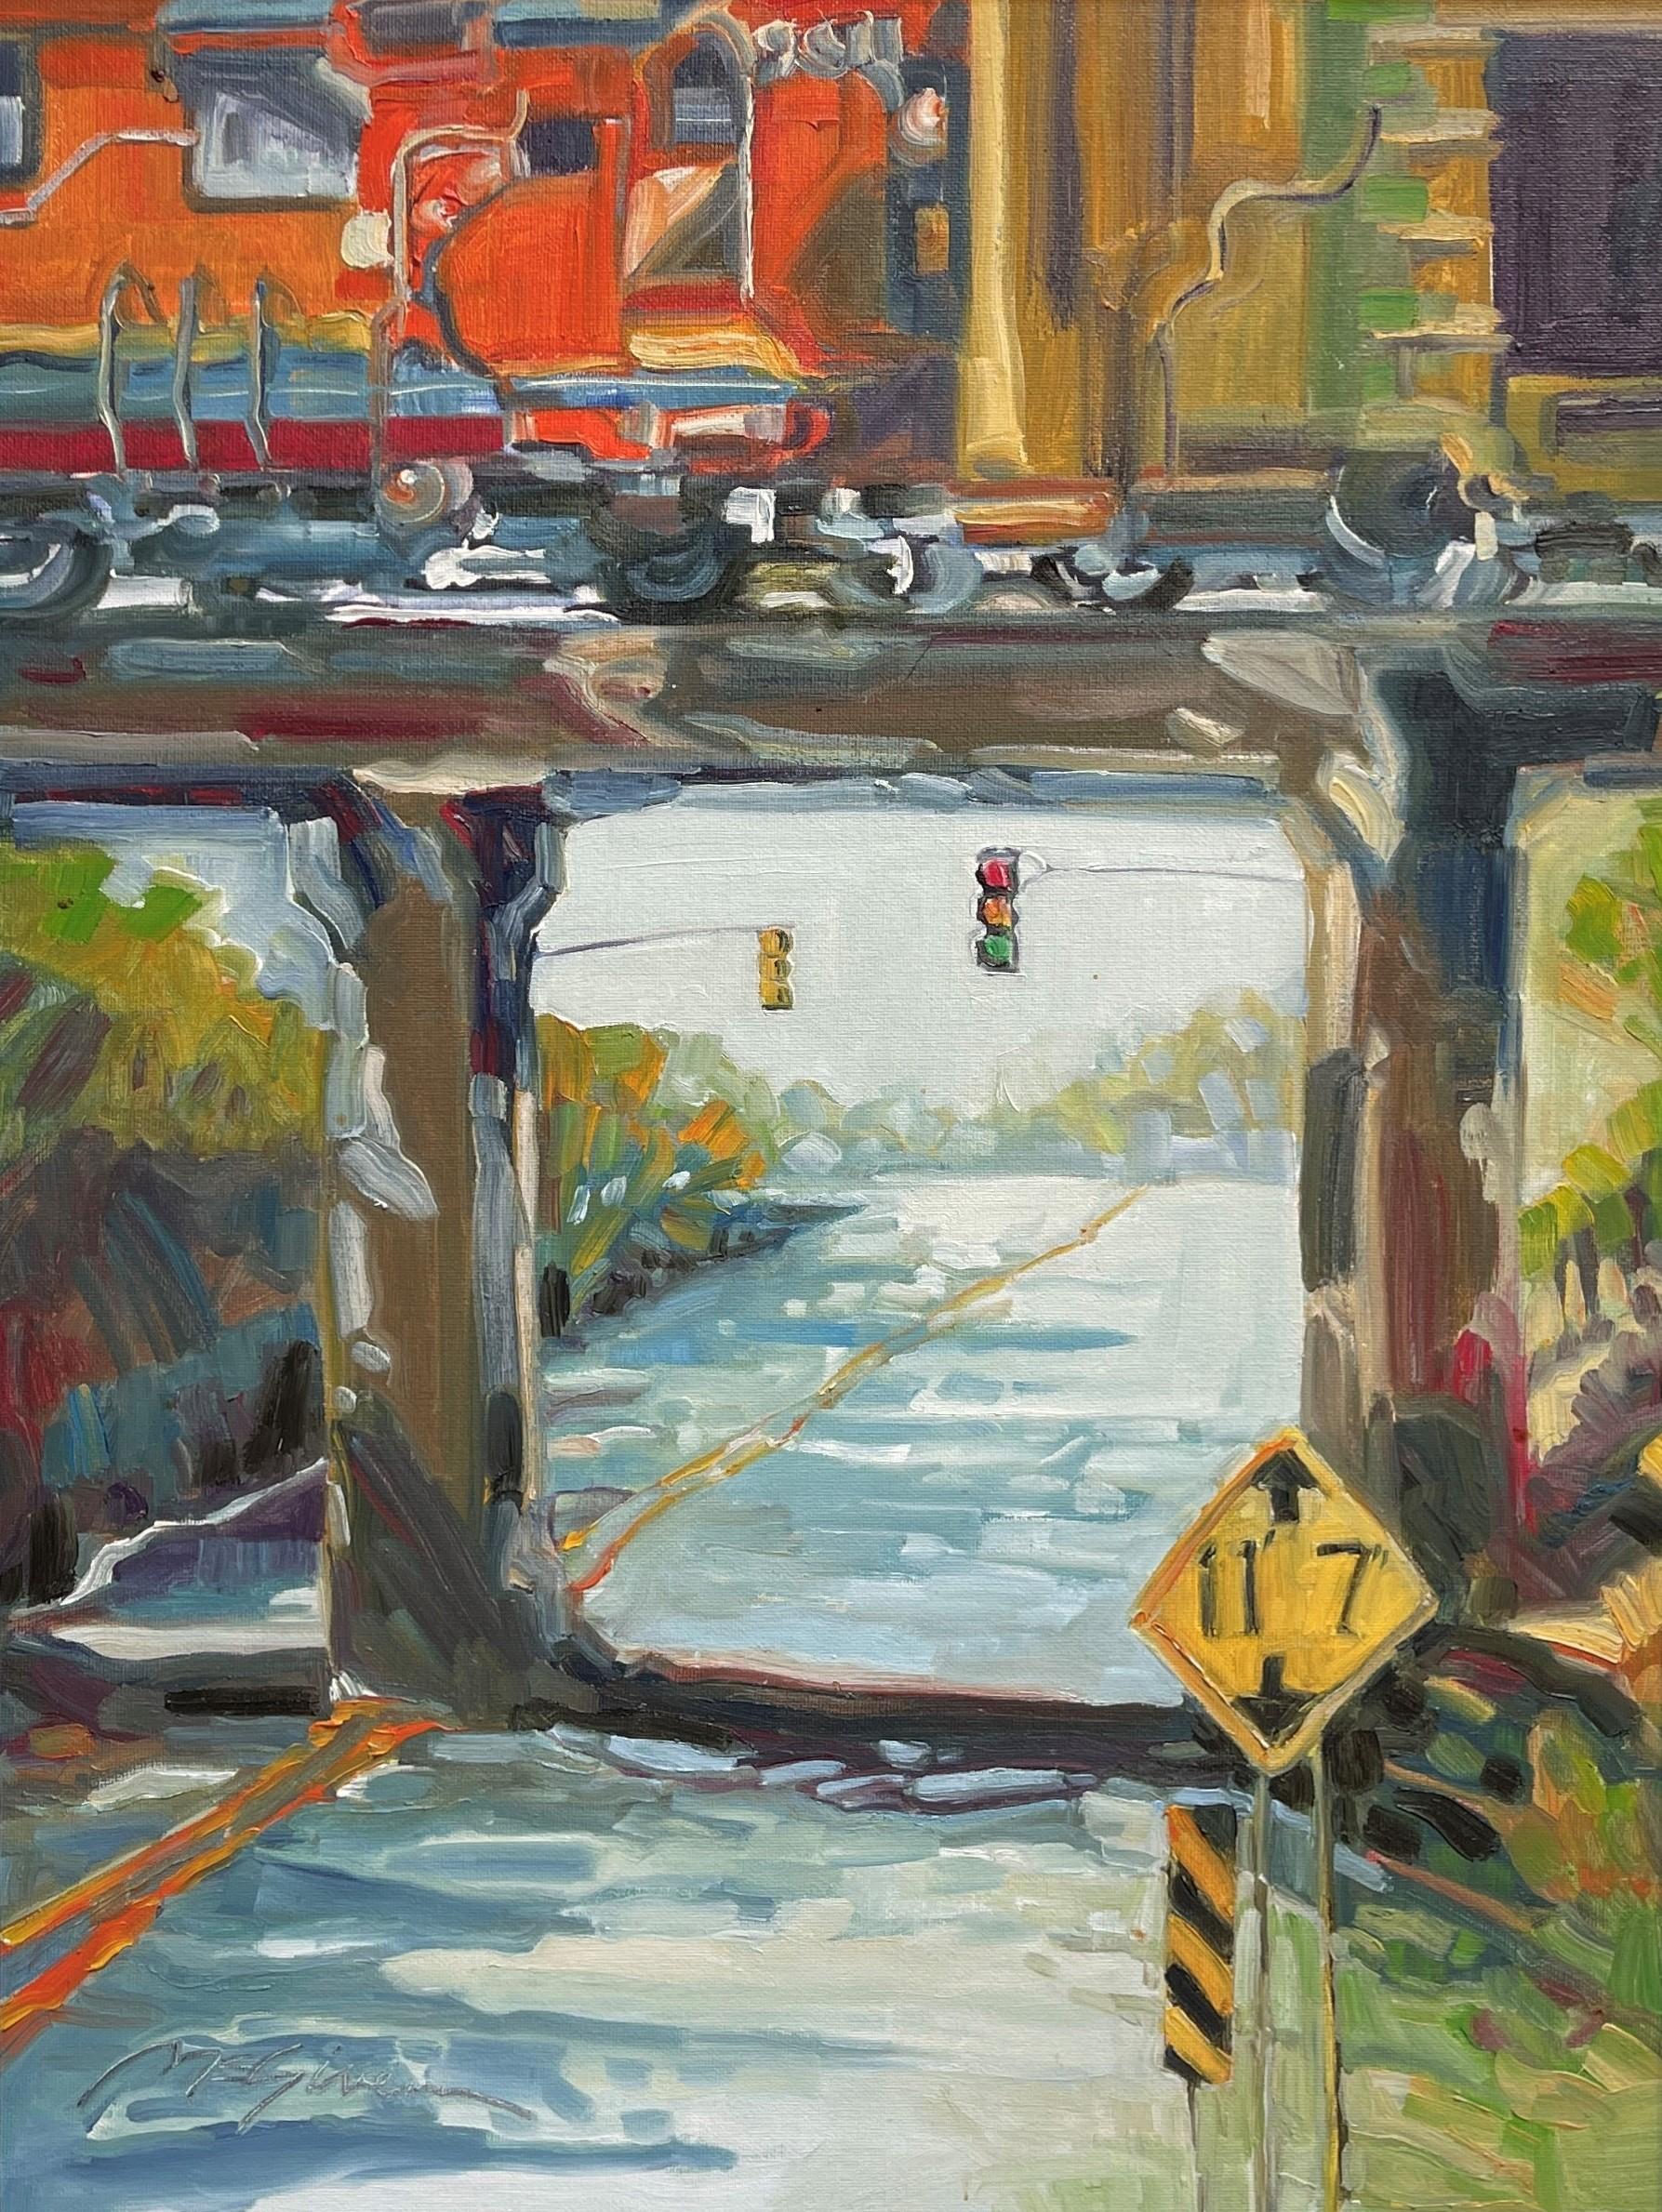 Peggy McGivern Landscape Painting - "Low Clearance" Oil Painting featuring a train